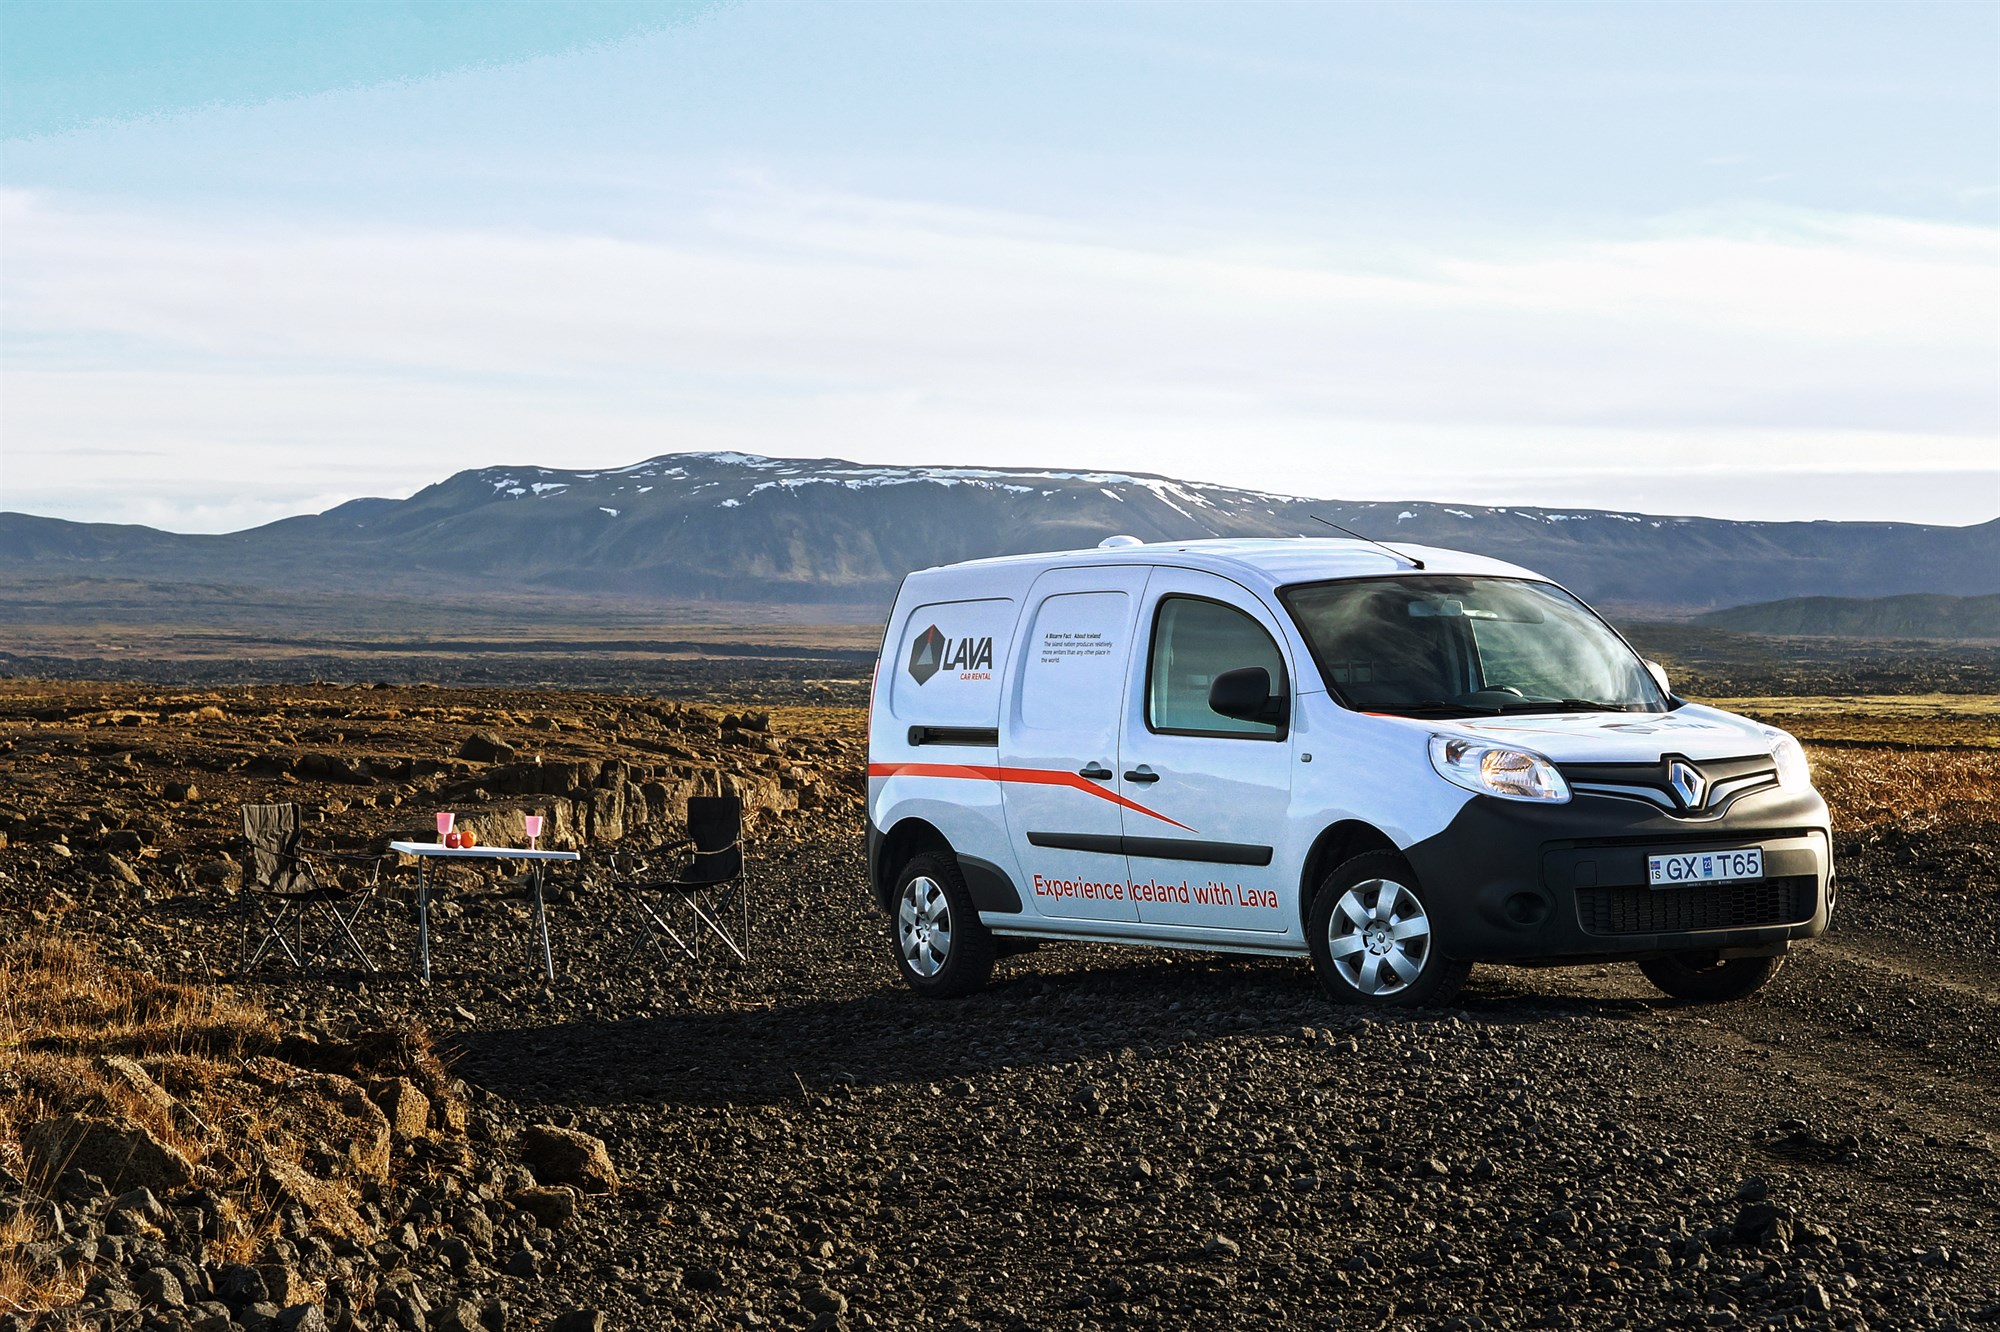 Renault KANGOO Maxi is one of the most popular campervan choice available in LAVA car rental Iceland